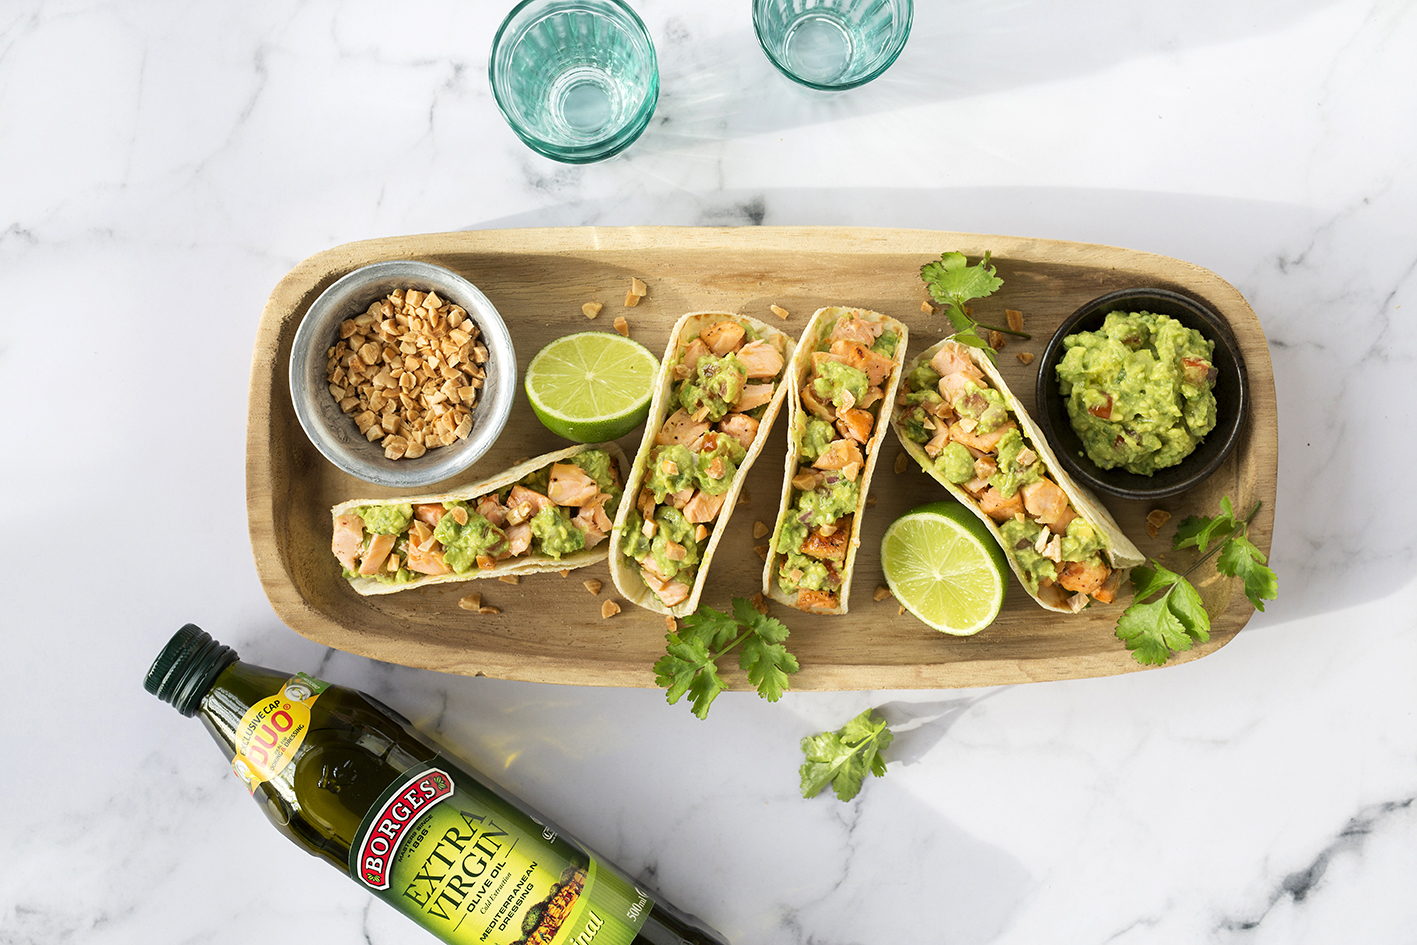 Salmon tacos with guacamole served on a wooden tray